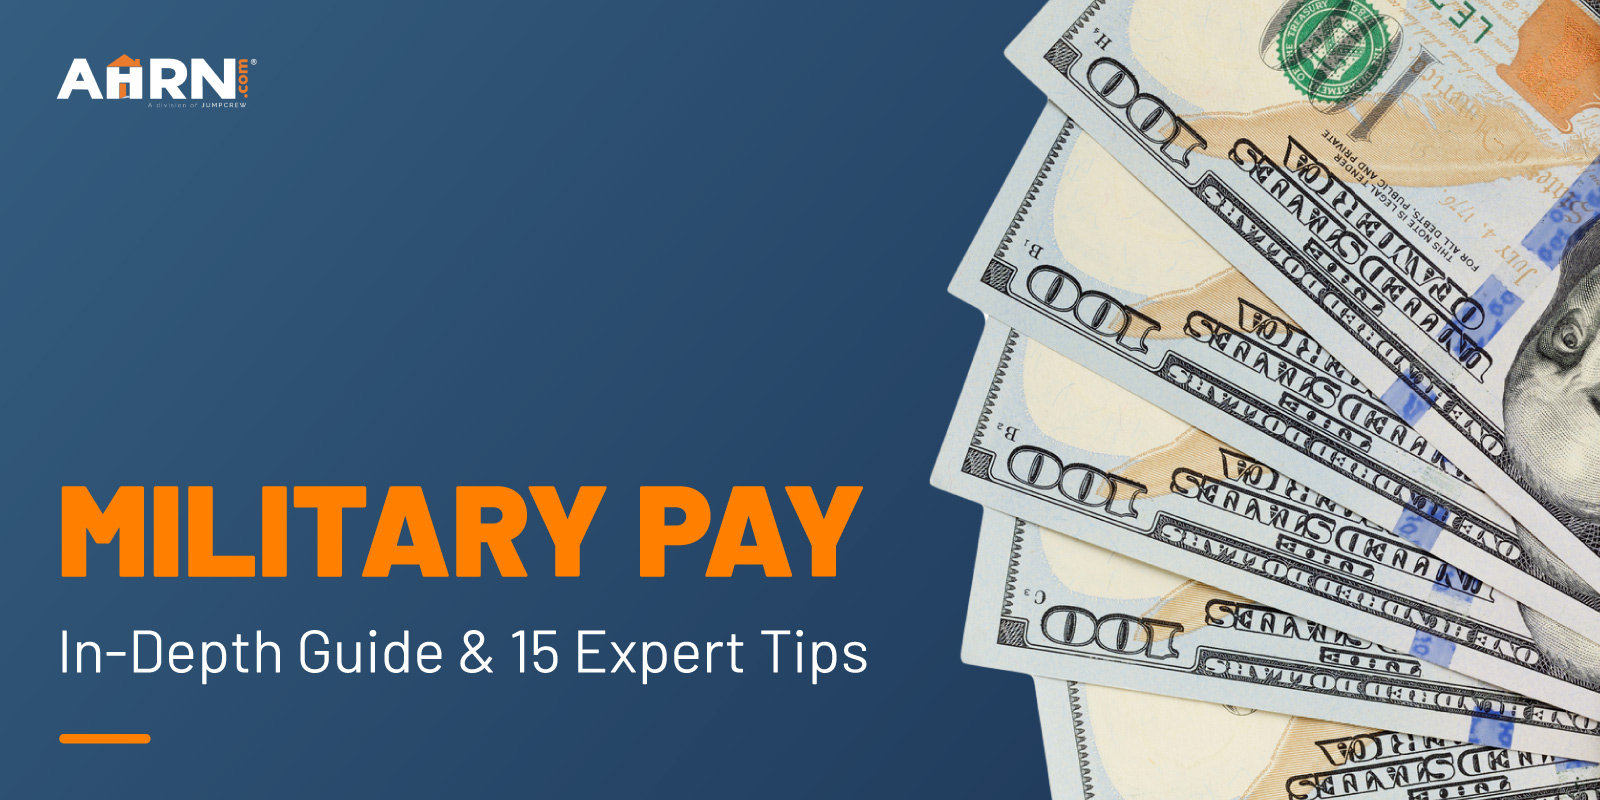 Military Pay: In-Depth Guide & Expert Tips